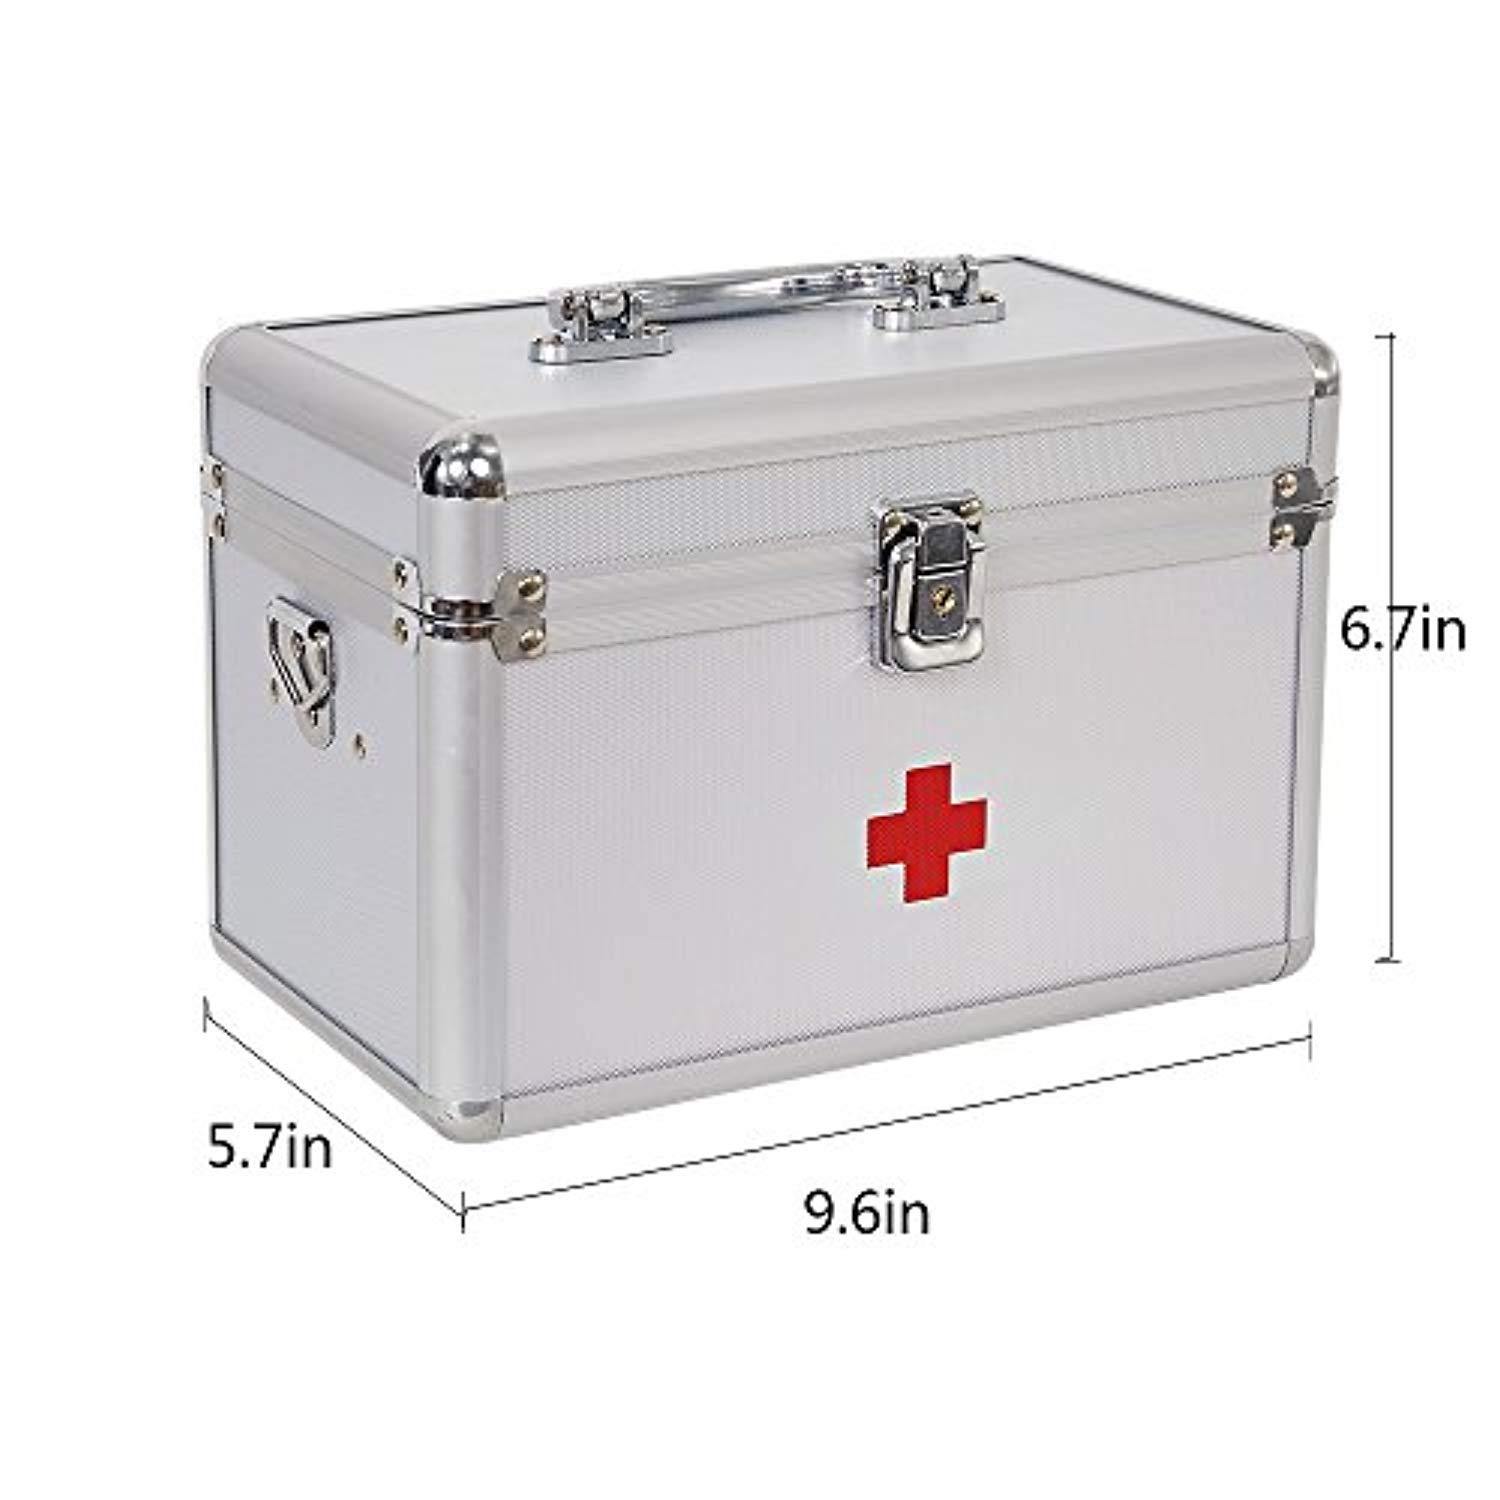 Bosonshop Lockable Medicine Storage Box,First Aid Box with Compartments